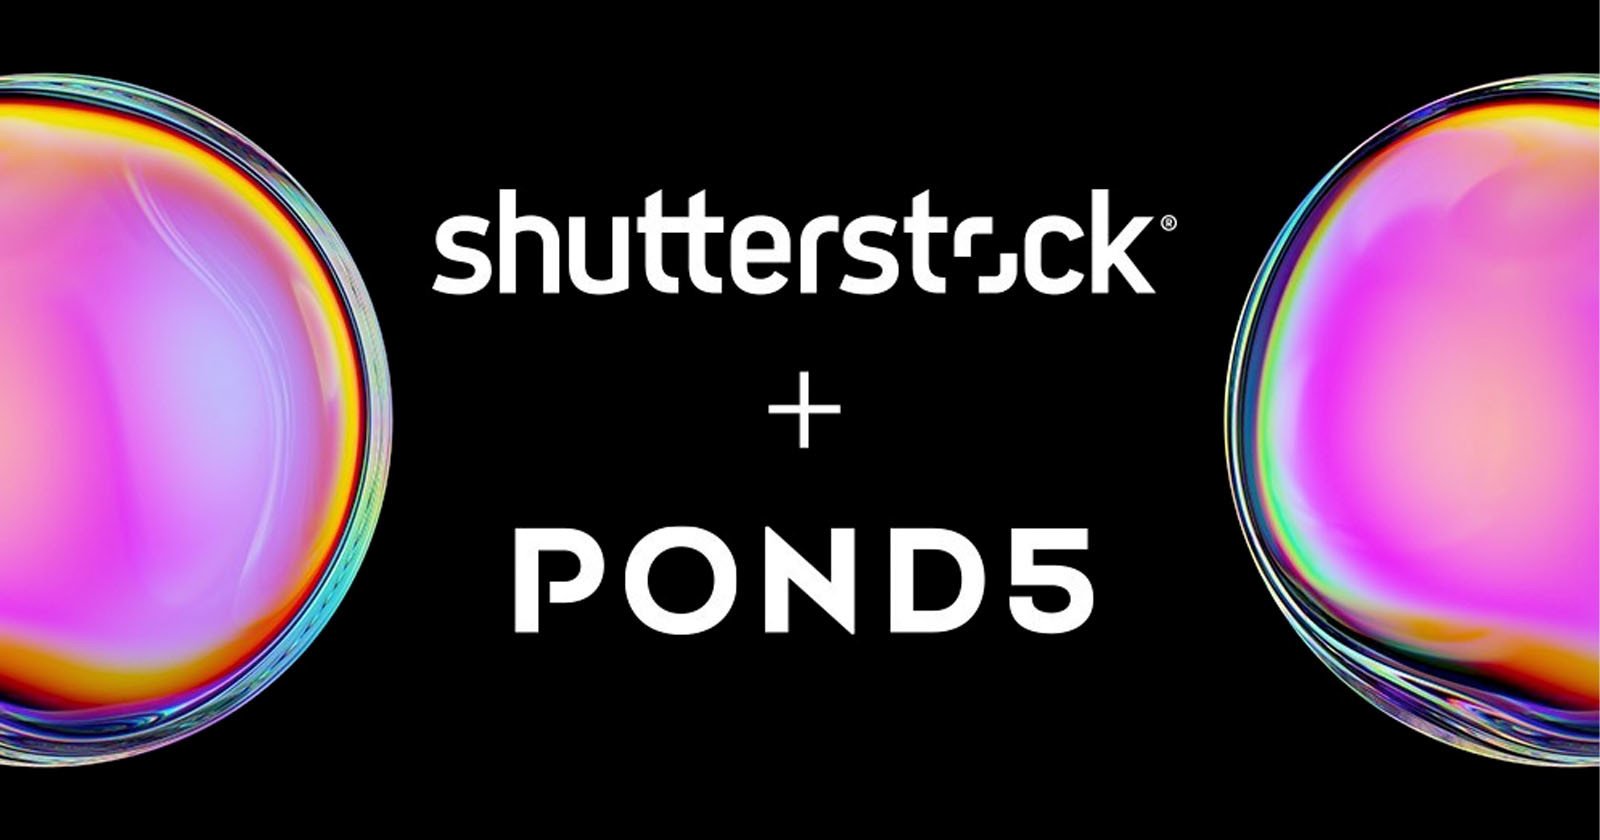 Shutterstock is Pulling its Over 30 Million Pond5 Assets from Adobe Stock